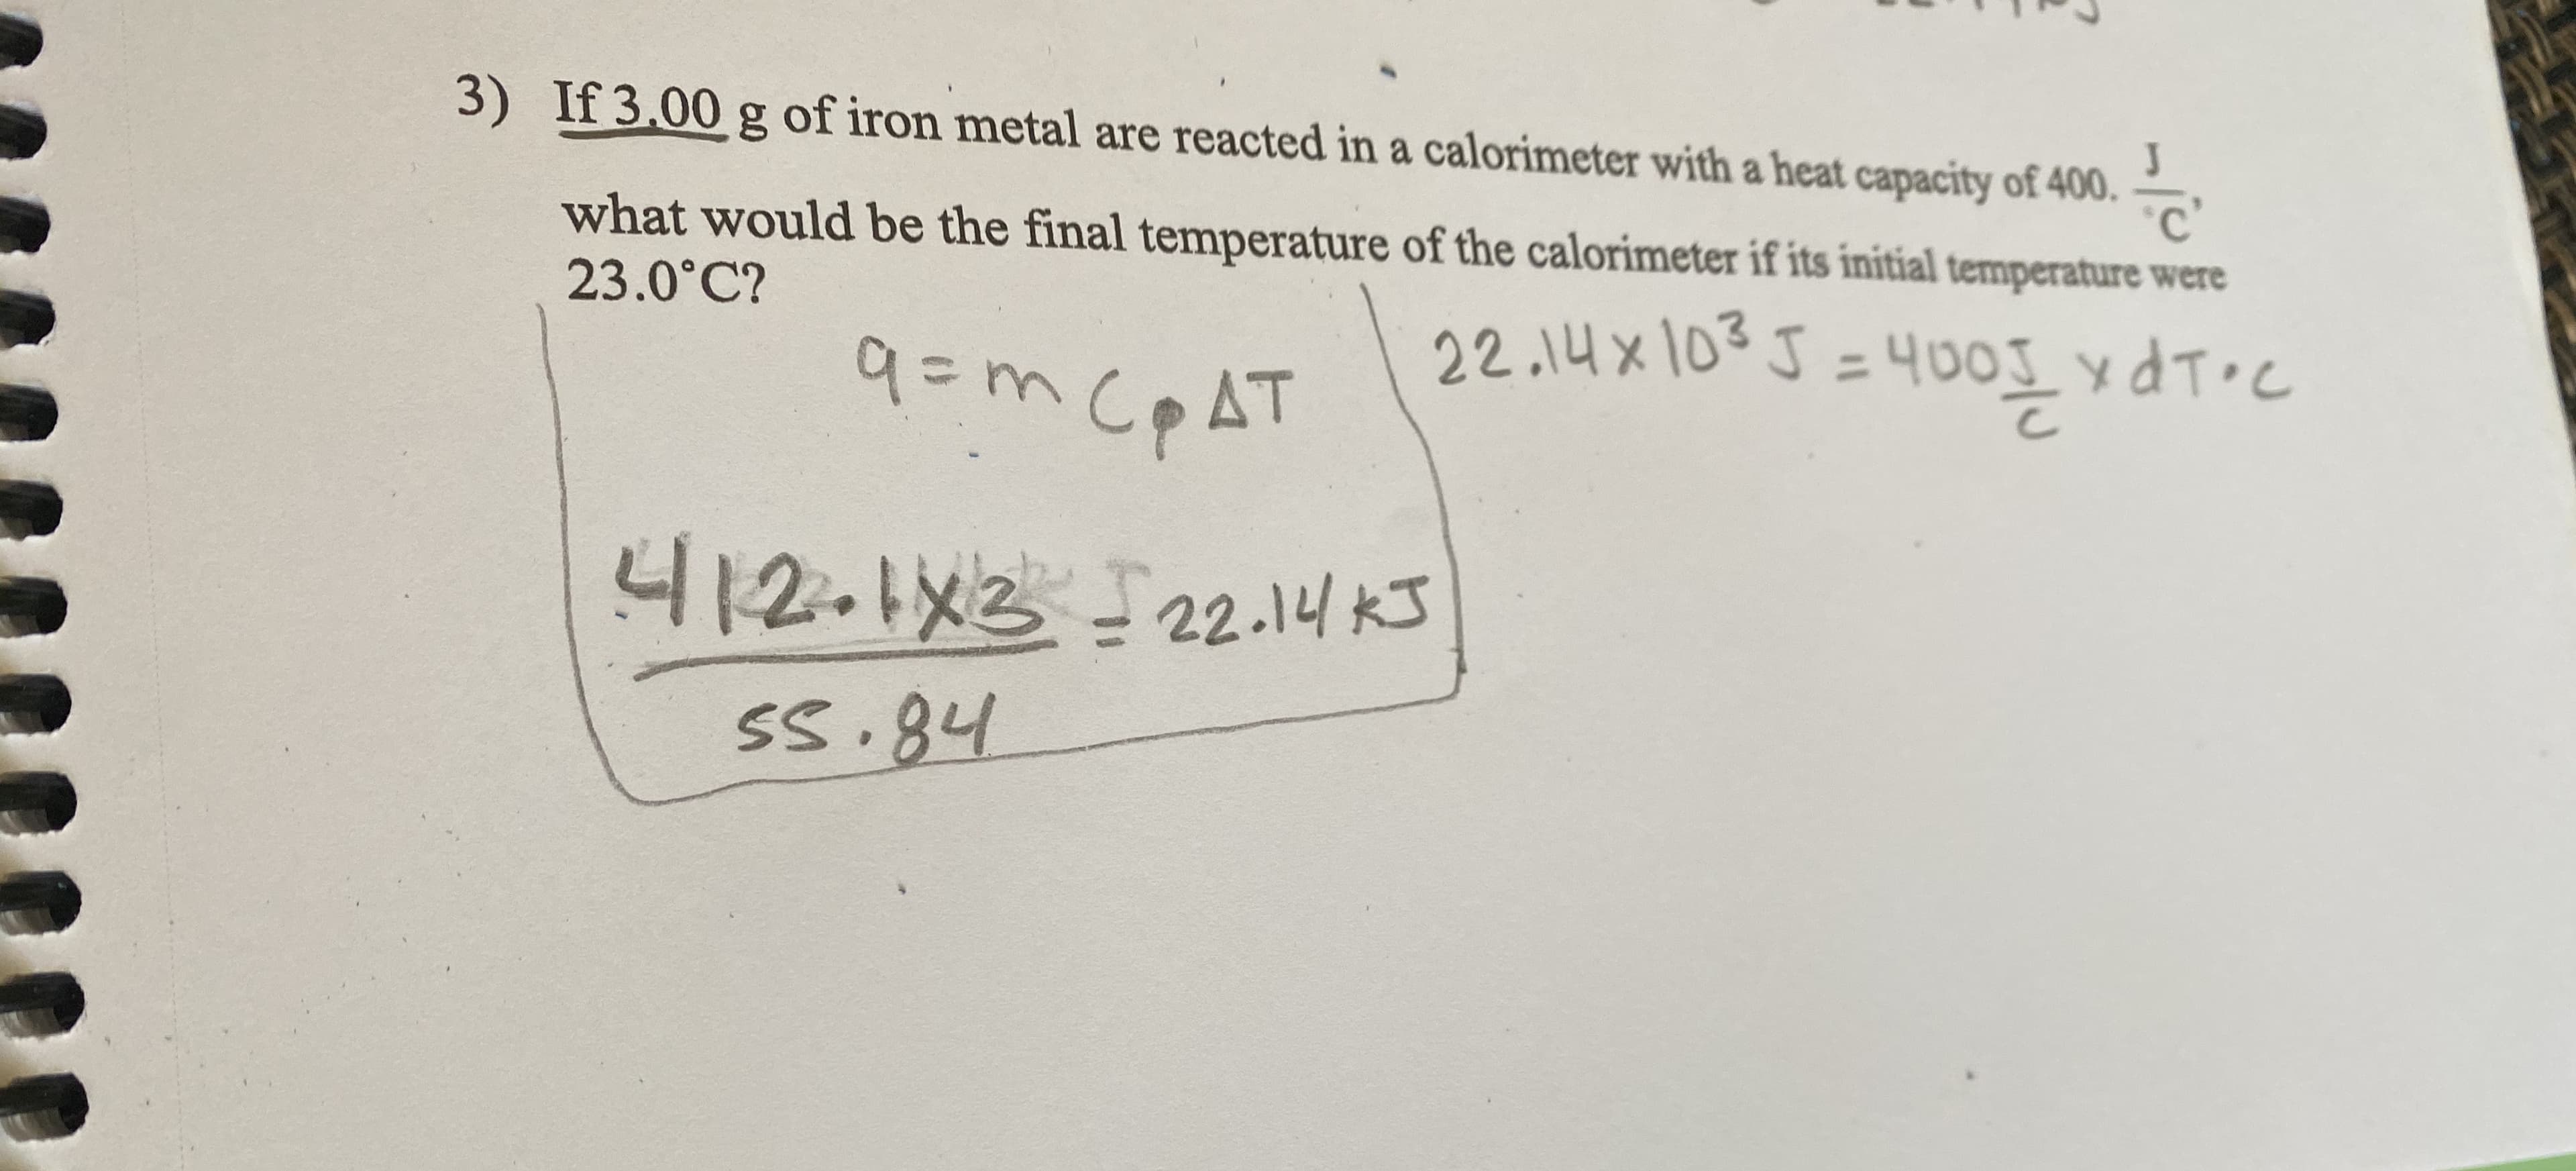 3) If 3.00 g of iron metal are reacted in a calorimeter with a heat capacity of 400.
what would be the final temperature of the calorimeter if its initial temperature were
23.0°C?
22.14x103J =400I xdT•C
9=m CPAT
니12.x2 -22.1니 3
Ss.84
